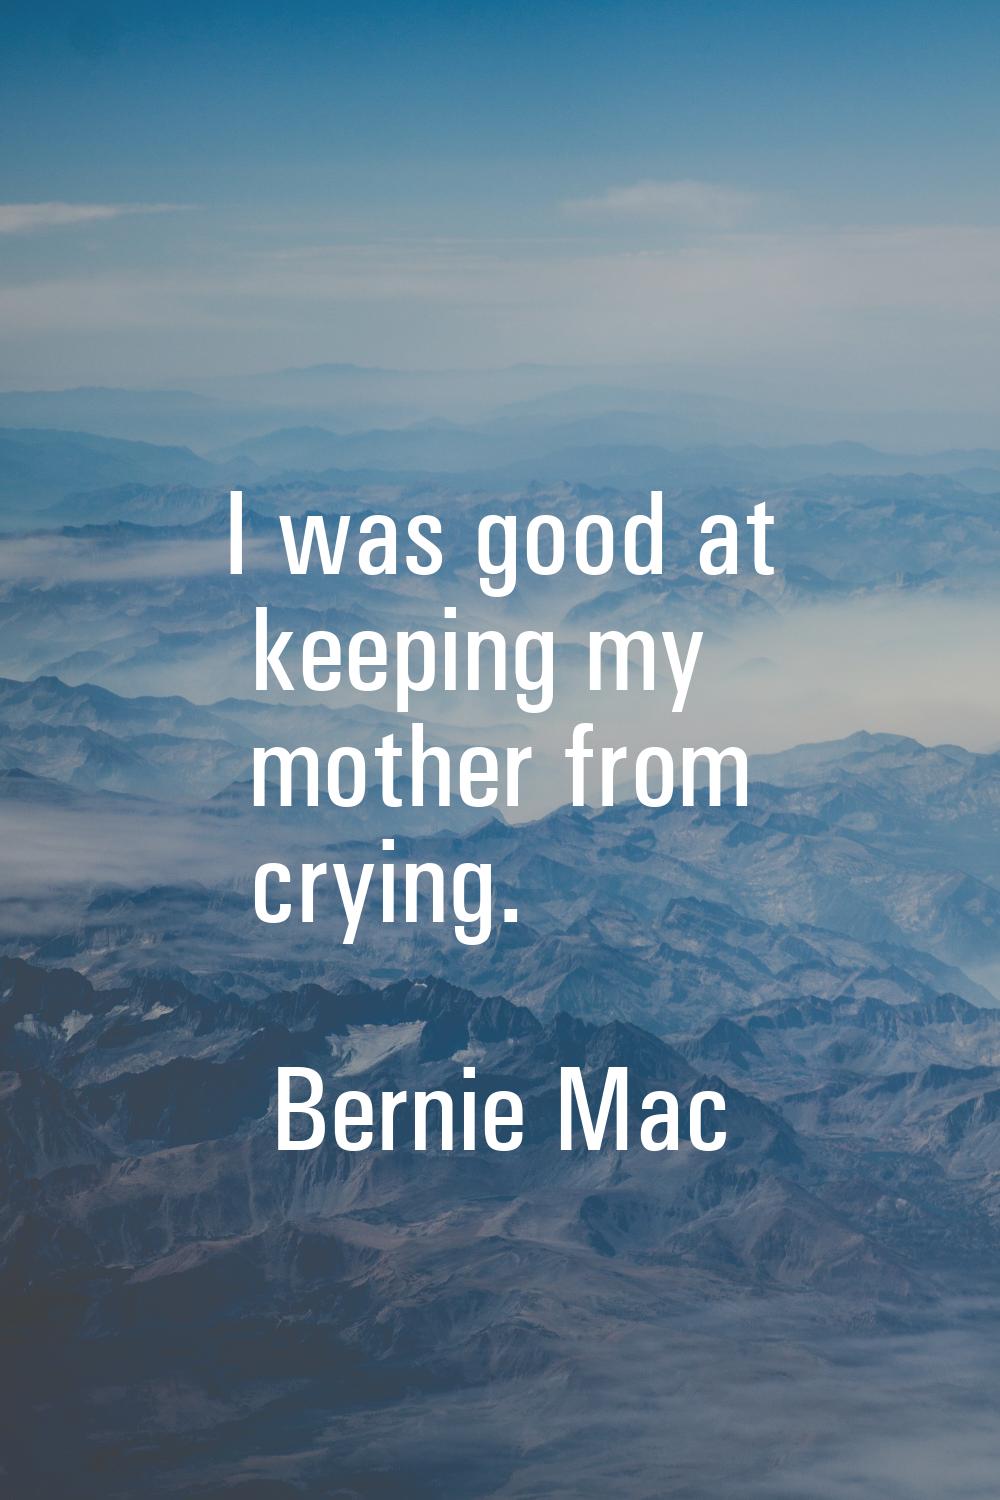 I was good at keeping my mother from crying.